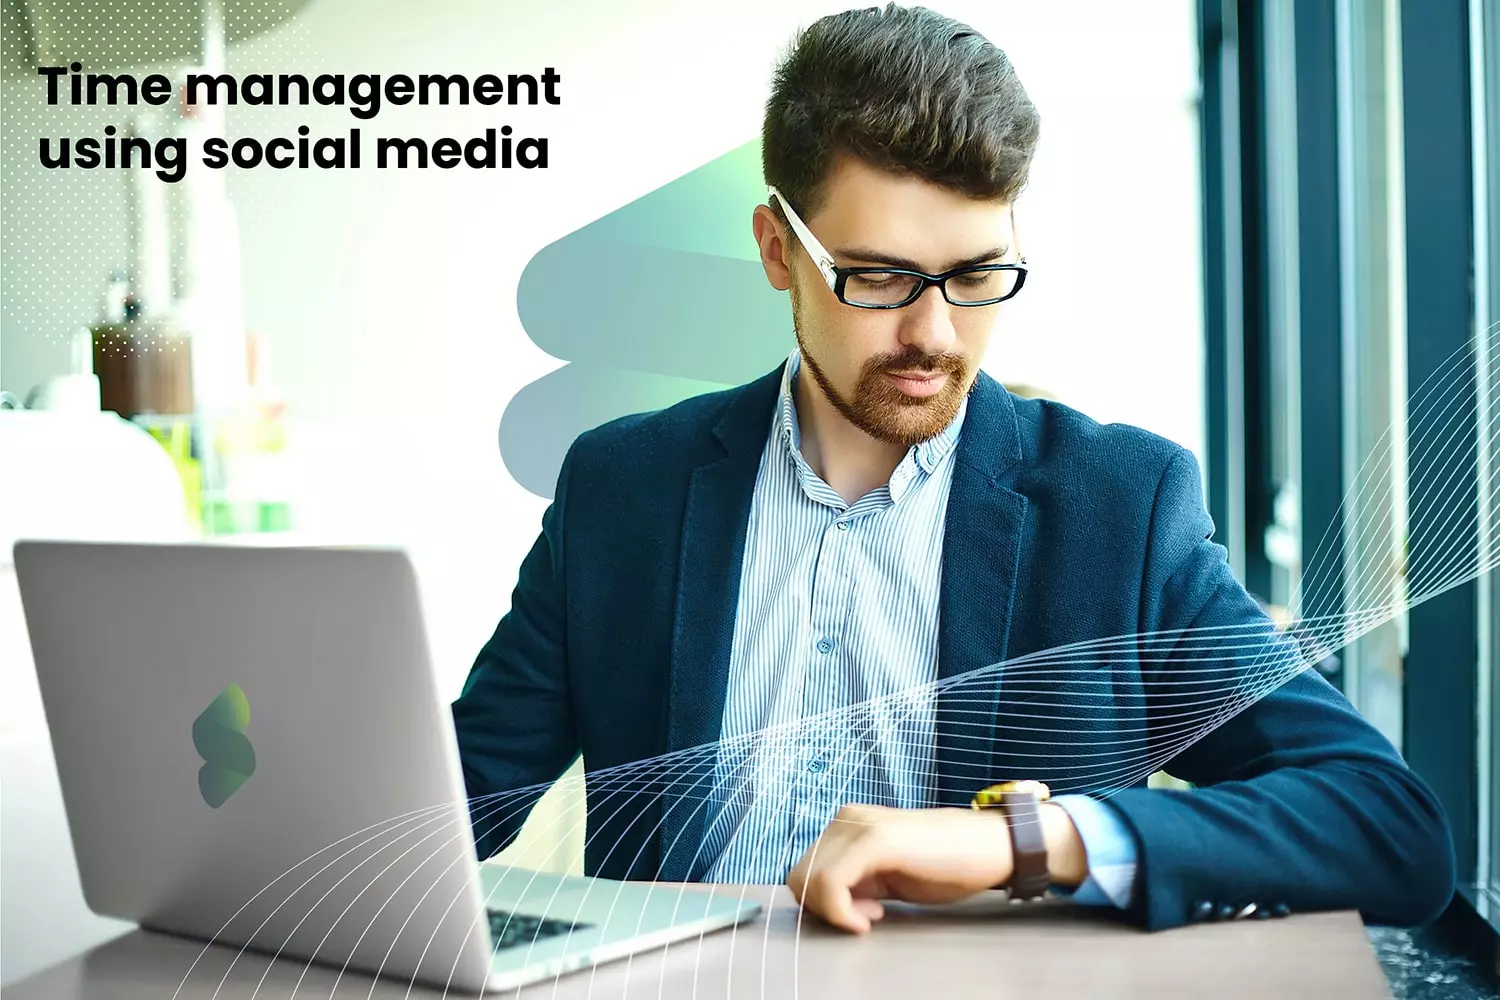 Time management while using social media